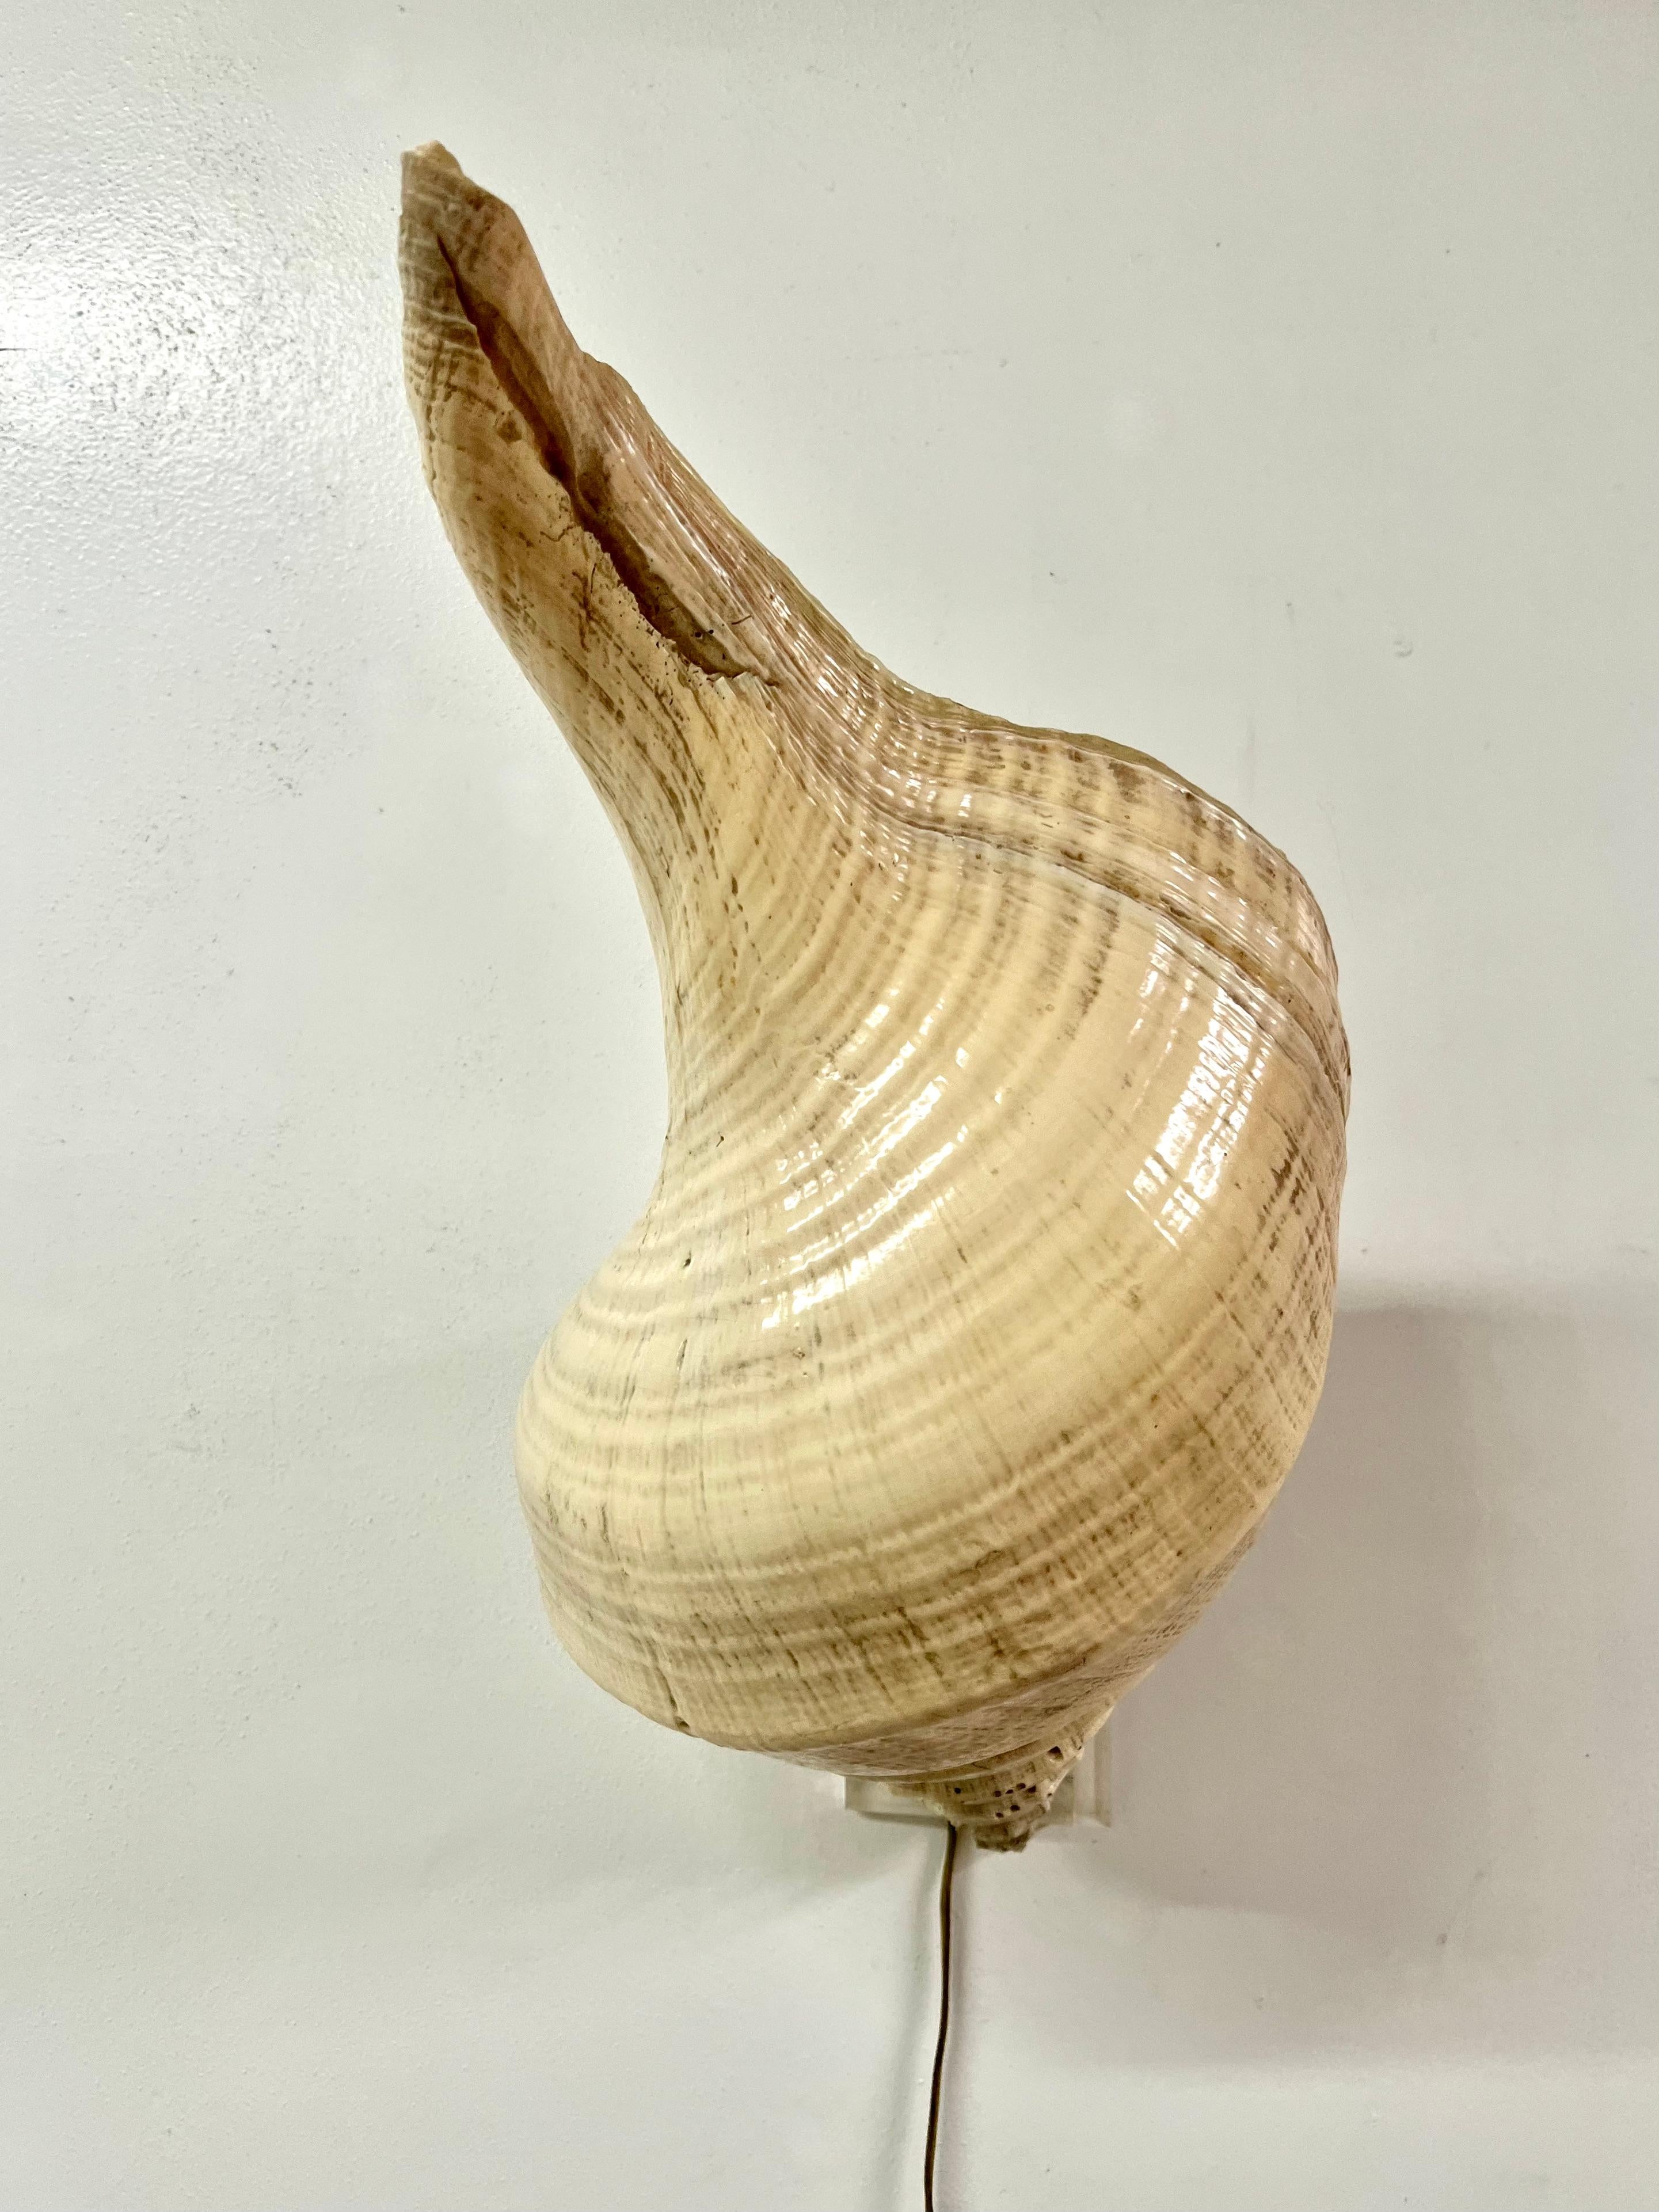 A conch shell sconce for wall hanging with a light inside. the light can also be laid flat on a table and used as a decorative piece, or laid into a garden setting.

the piece is quite unique and ready for use. The cord comes from the nearest end